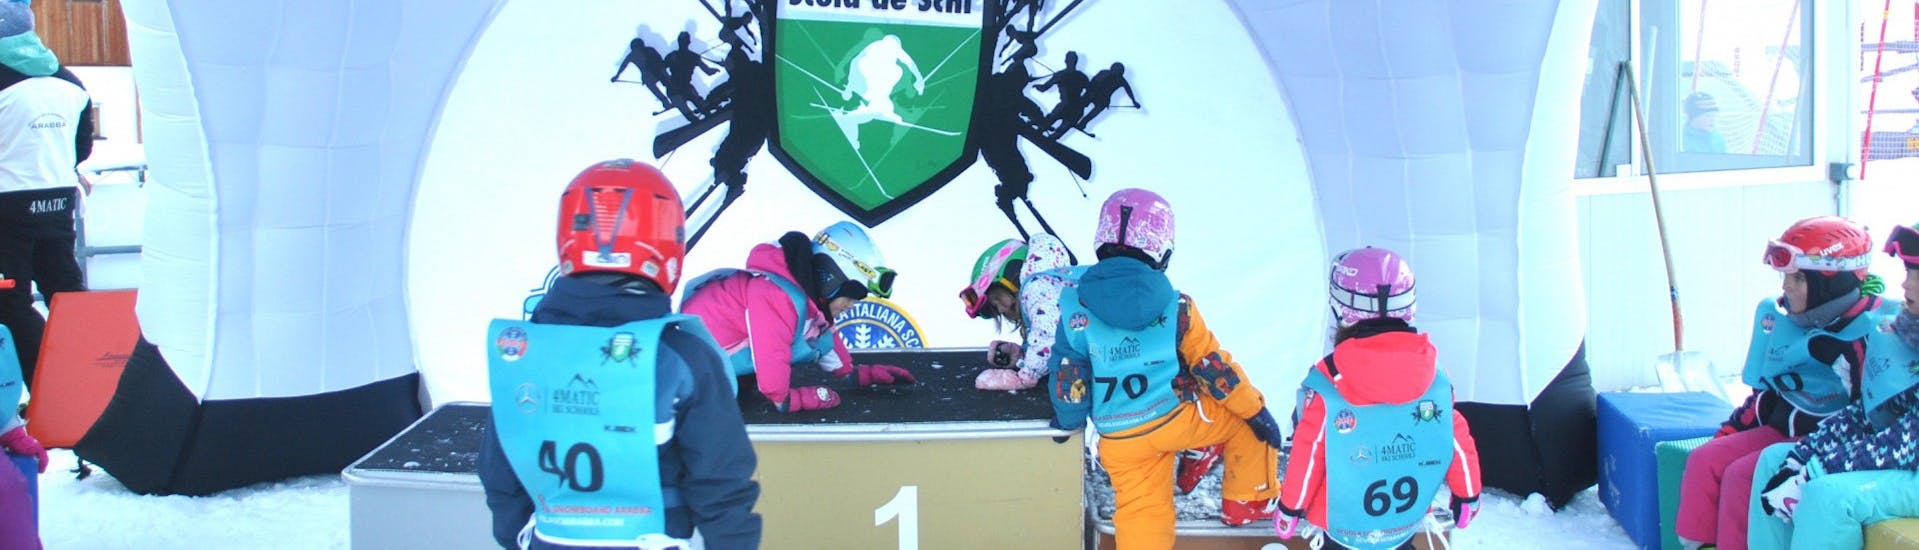 Little skiers in the kids area during the Kids Ski Lessons (from 4 y.) for All Levels with Scuola Italiana Sci Arabba.